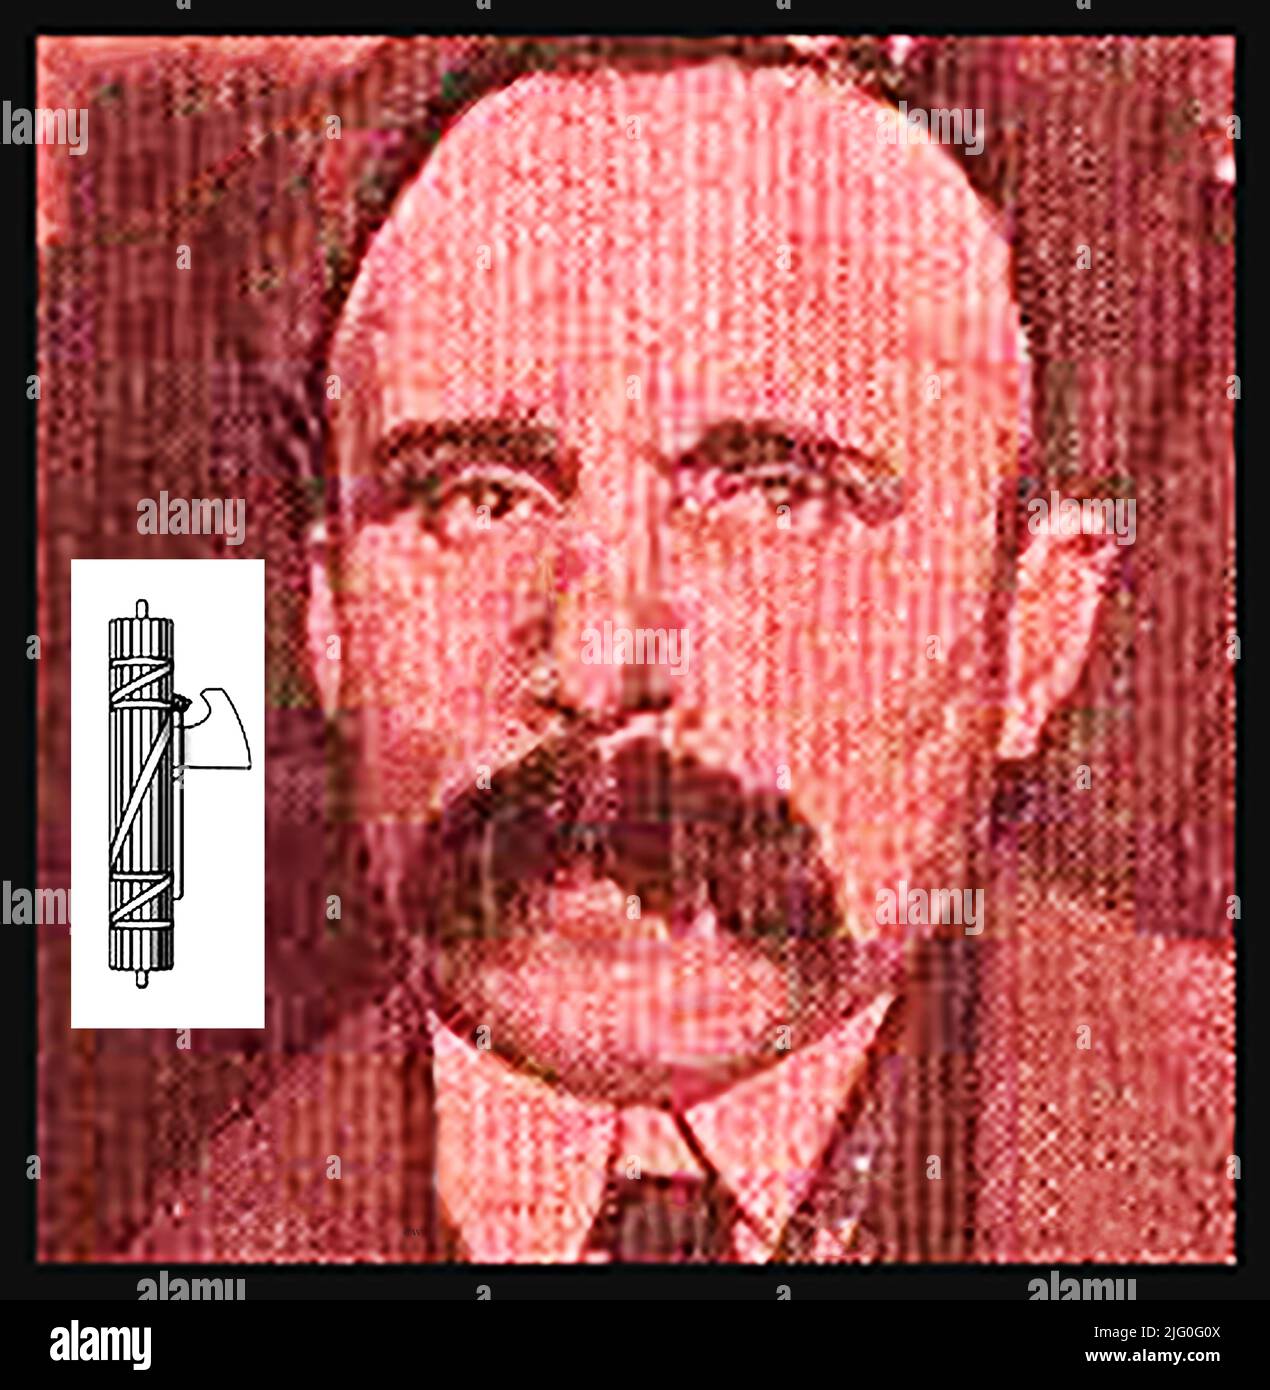 Portrait of Italian born US  anarchist Bartolomeo Vanzetti (inset is the fascist symbol). Portrait of Italian born US  anarchist Niccolo Sacco (inset is the fascist fasces symbol). The US  Italian migrants Sacco &  Vanzetti   were controversially accused of being anarchists who had murdered a guard and a paymaster during an armed robbery at the Slater and Morrill Shoe Company in Braintree, Massachusetts. They were found guilty and were executed in the electric chair at Charlestown State Prison on July 14, 1921. Some believe that they were innocent scapegoats used  as a convenient means to put Stock Photo